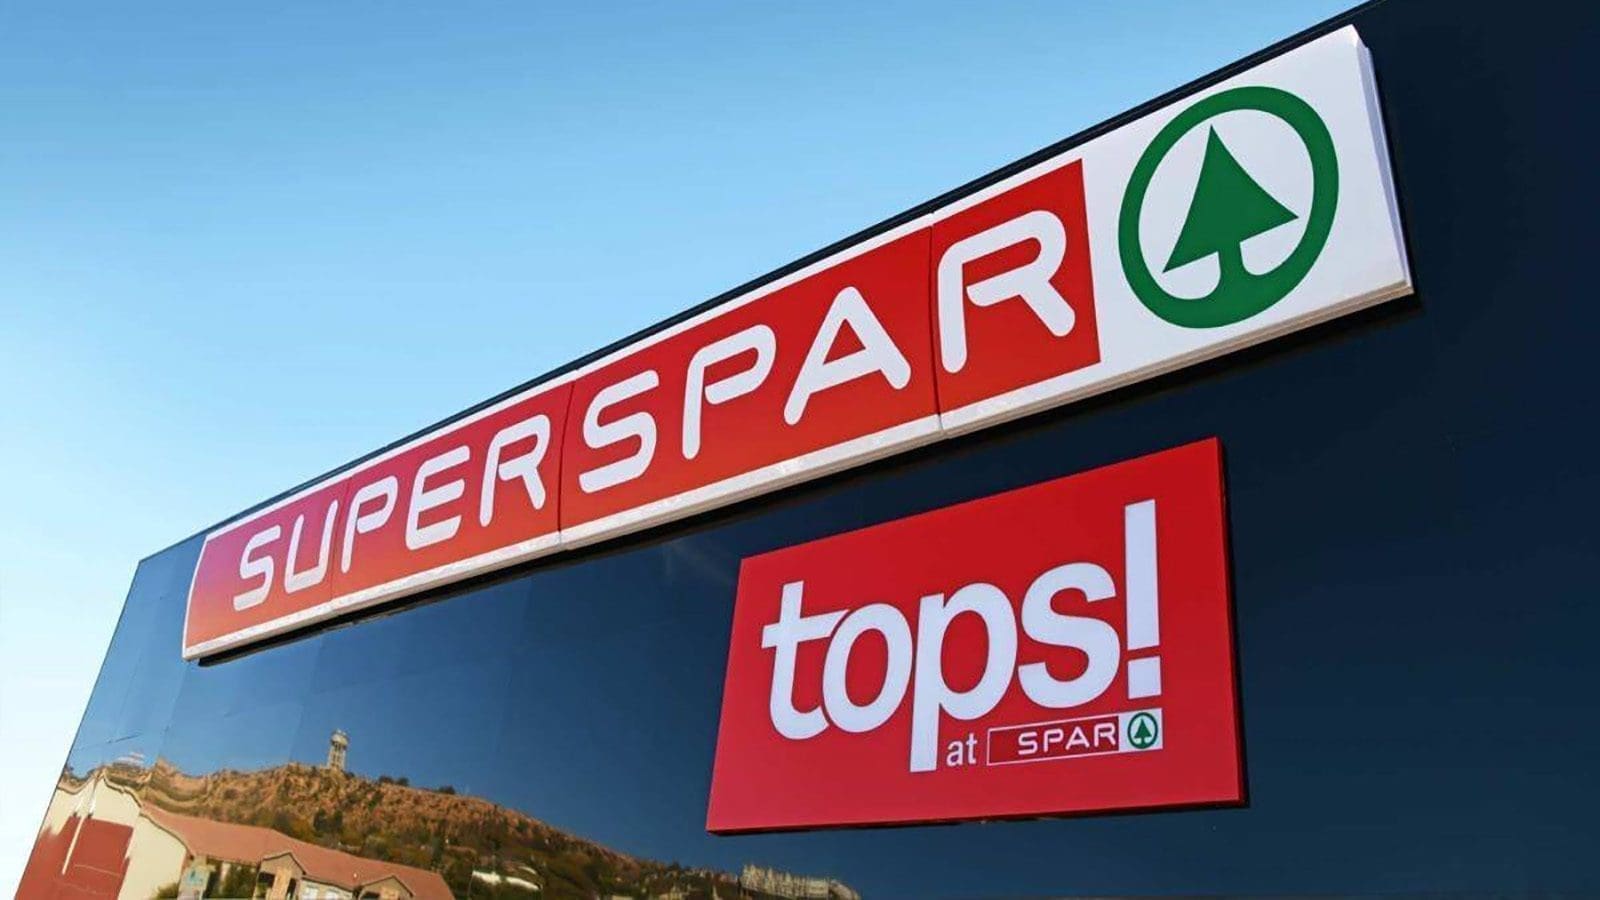 Spar’s group sales up 5.8% despite underwhelming performance in South Africa grocery business